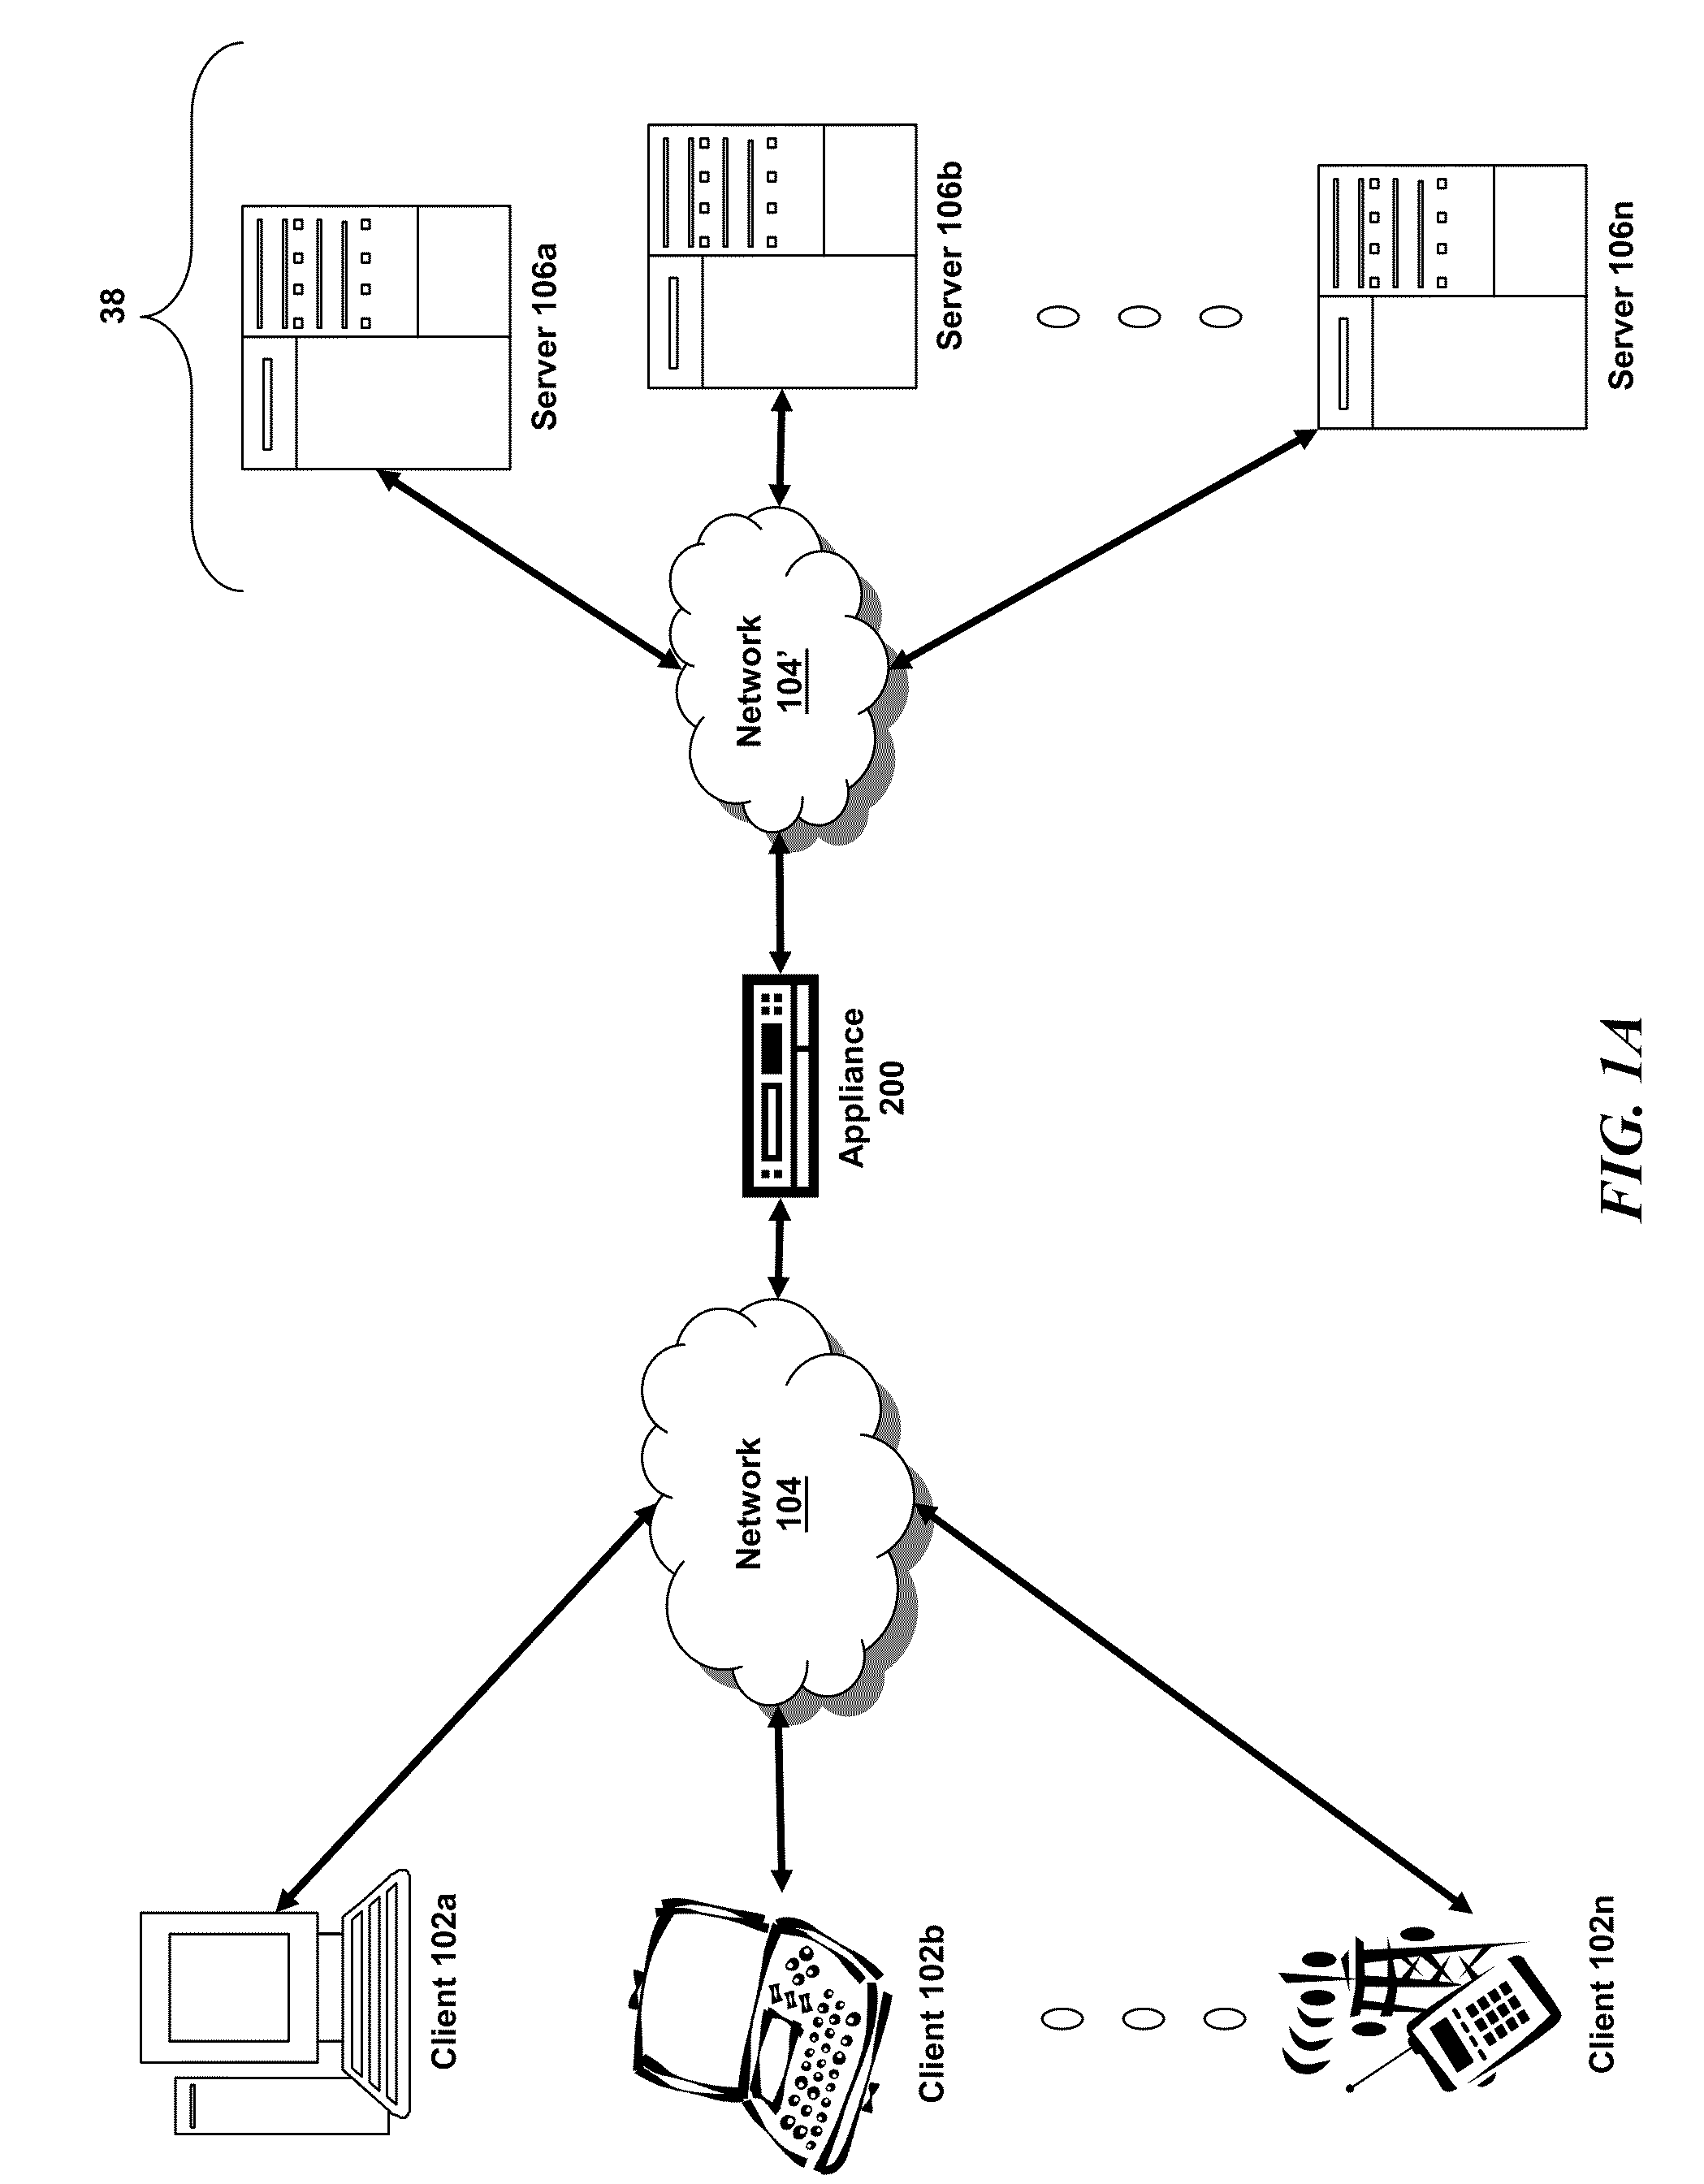 Systems and methods for managing spillover limits in a multi-core system